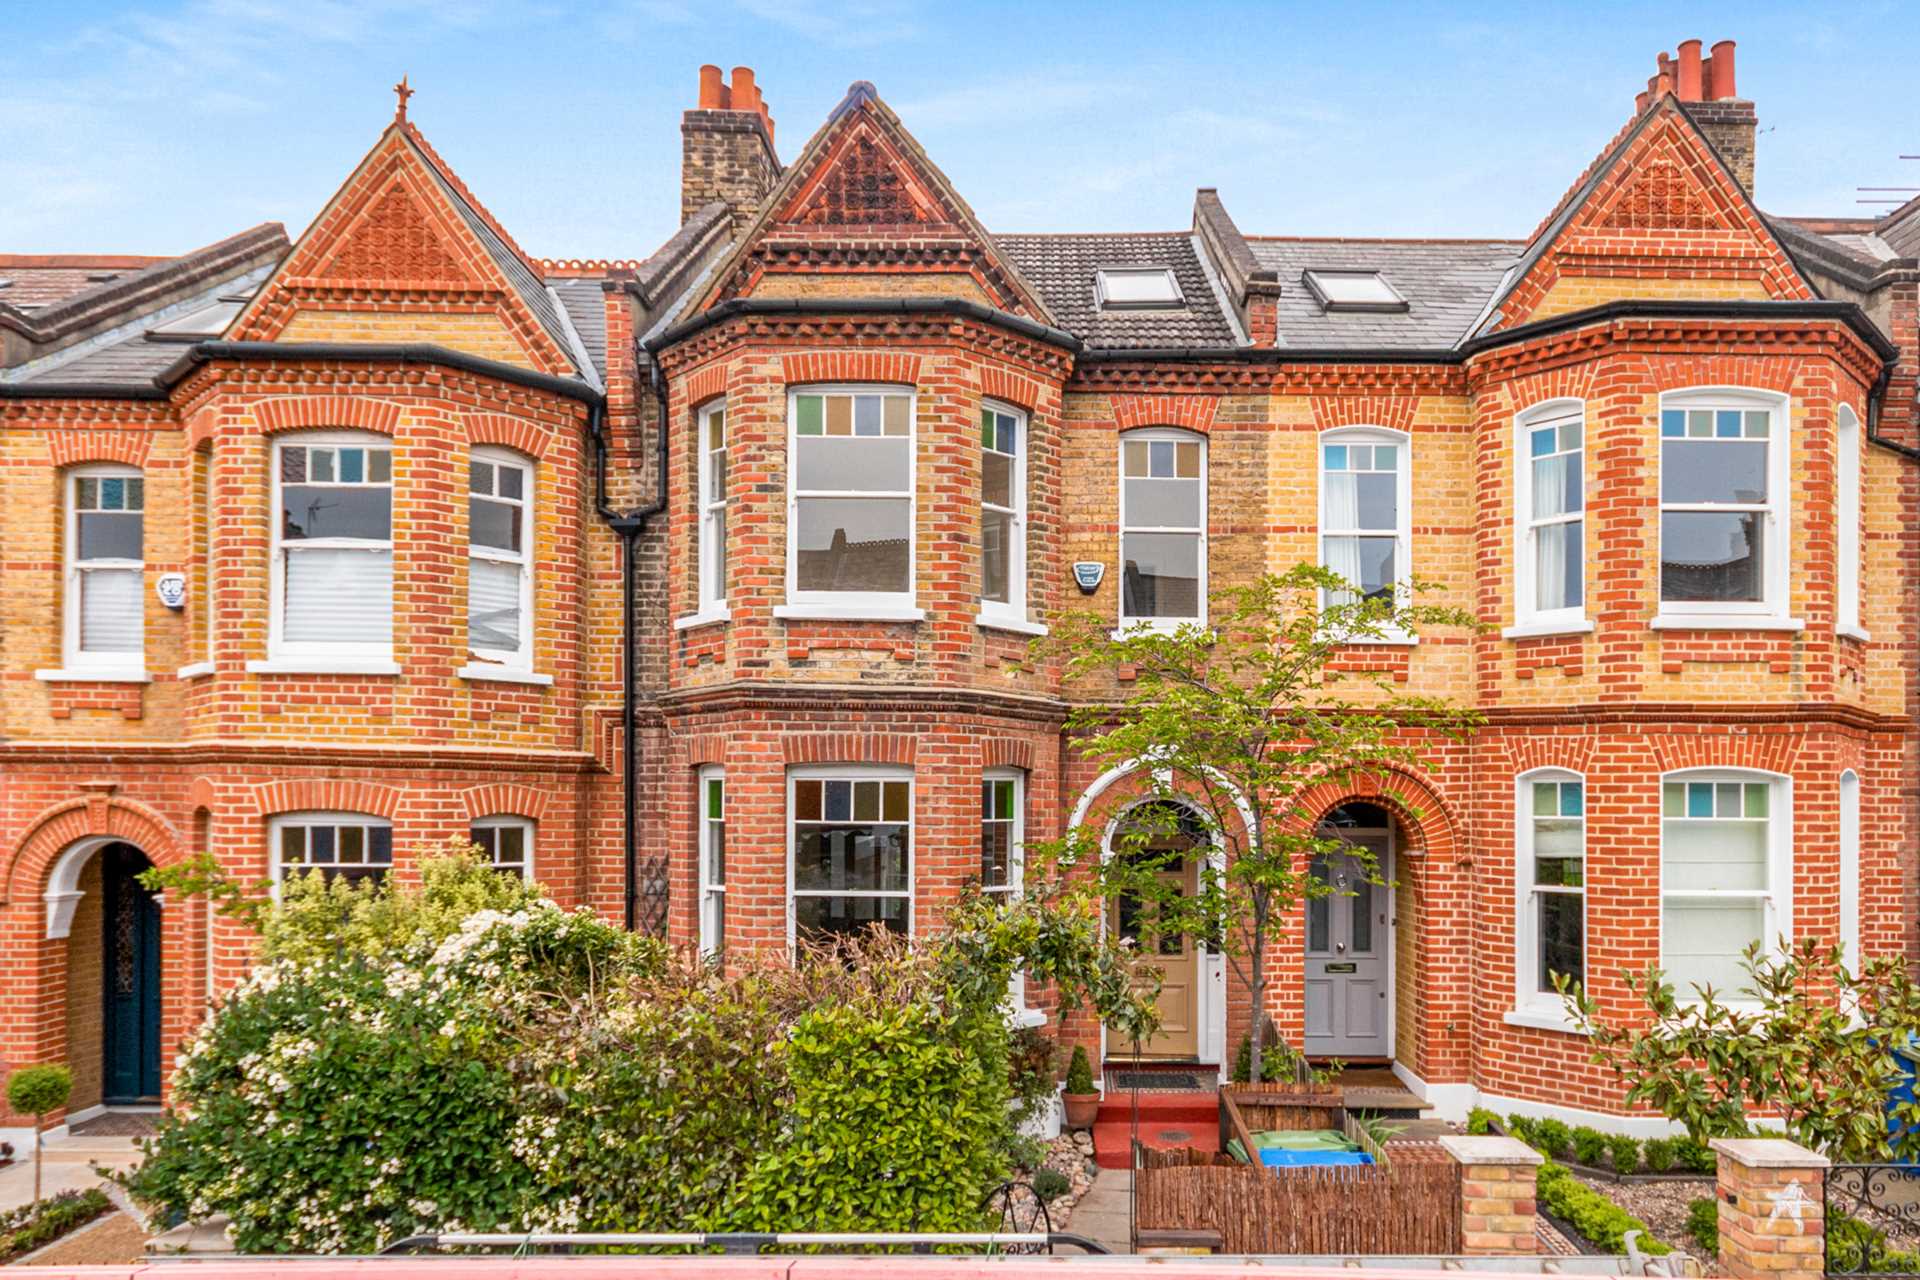 Beauval Road, Dulwich, SE22, Image 1